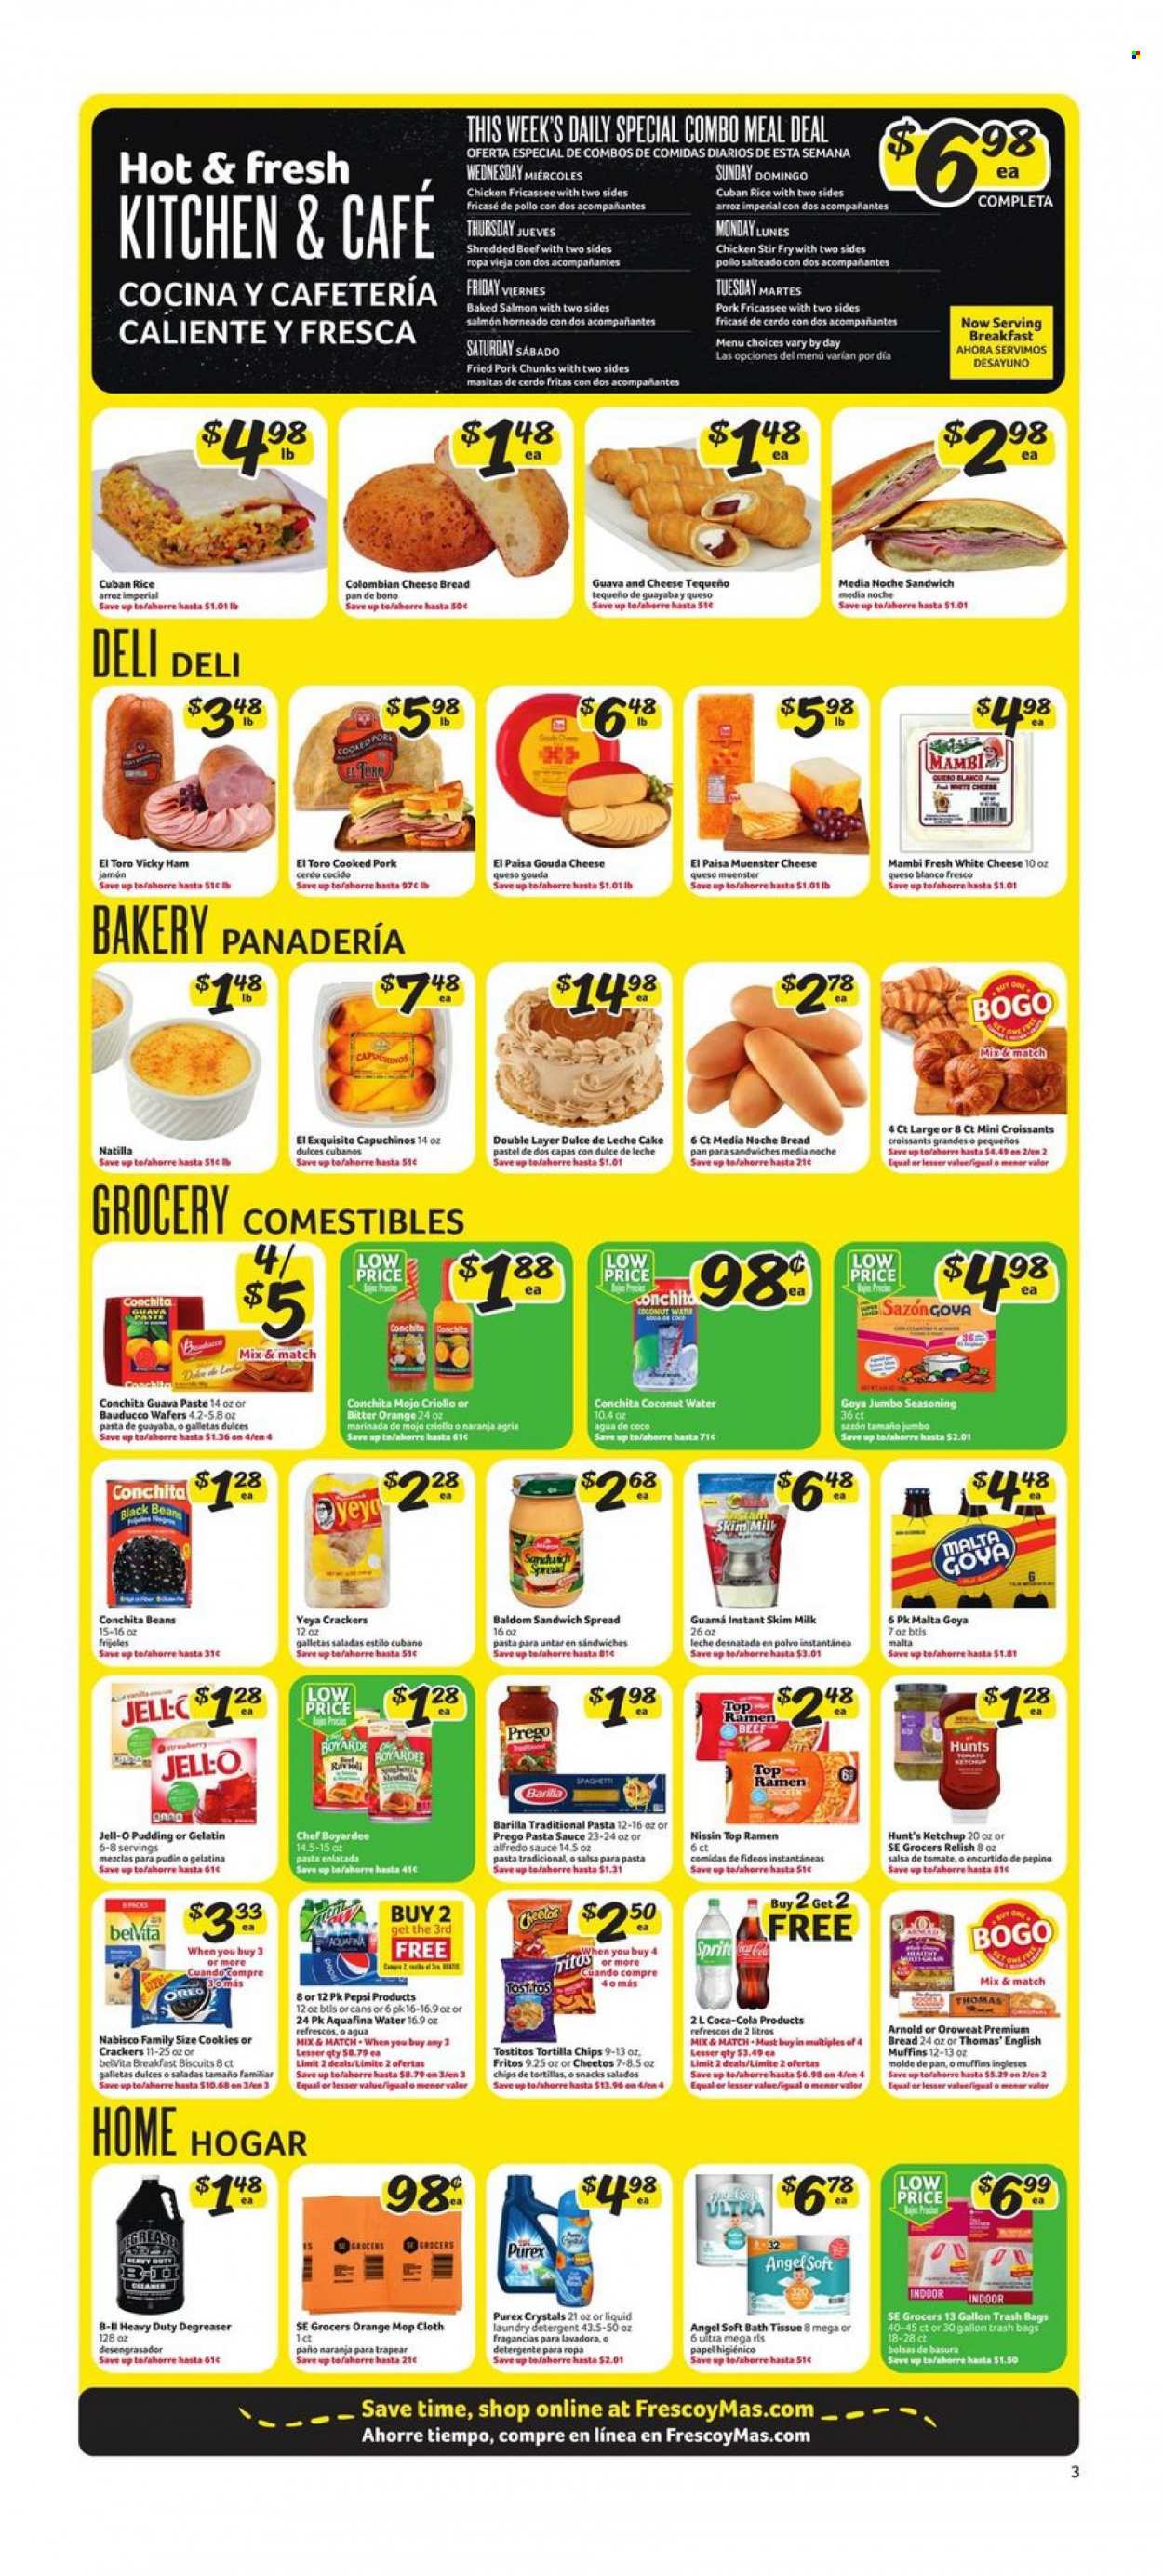 thumbnail - Fresco y Más Flyer - 05/31/2023 - 06/06/2023 - Sales products - bread, english muffins, cake, croissant, beans, cherries, oranges, salmon, ramen, ravioli, pasta sauce, sauce, Top Ramen, Barilla, Alfredo sauce, Nissin, ham, snack, gouda, Münster cheese, pudding, cookies, wafers, crackers, biscuit, Nabisco, Fritos, tortilla chips, Cheetos, chips, Tostitos, salty snack, Jell-O, black beans, Goya, Chef Boyardee, belVita, rice, spice, ketchup, salsa, Coca-Cola, Sprite, Pepsi, coconut water, soft drink, Aquafina, water, chicken. Page 3.